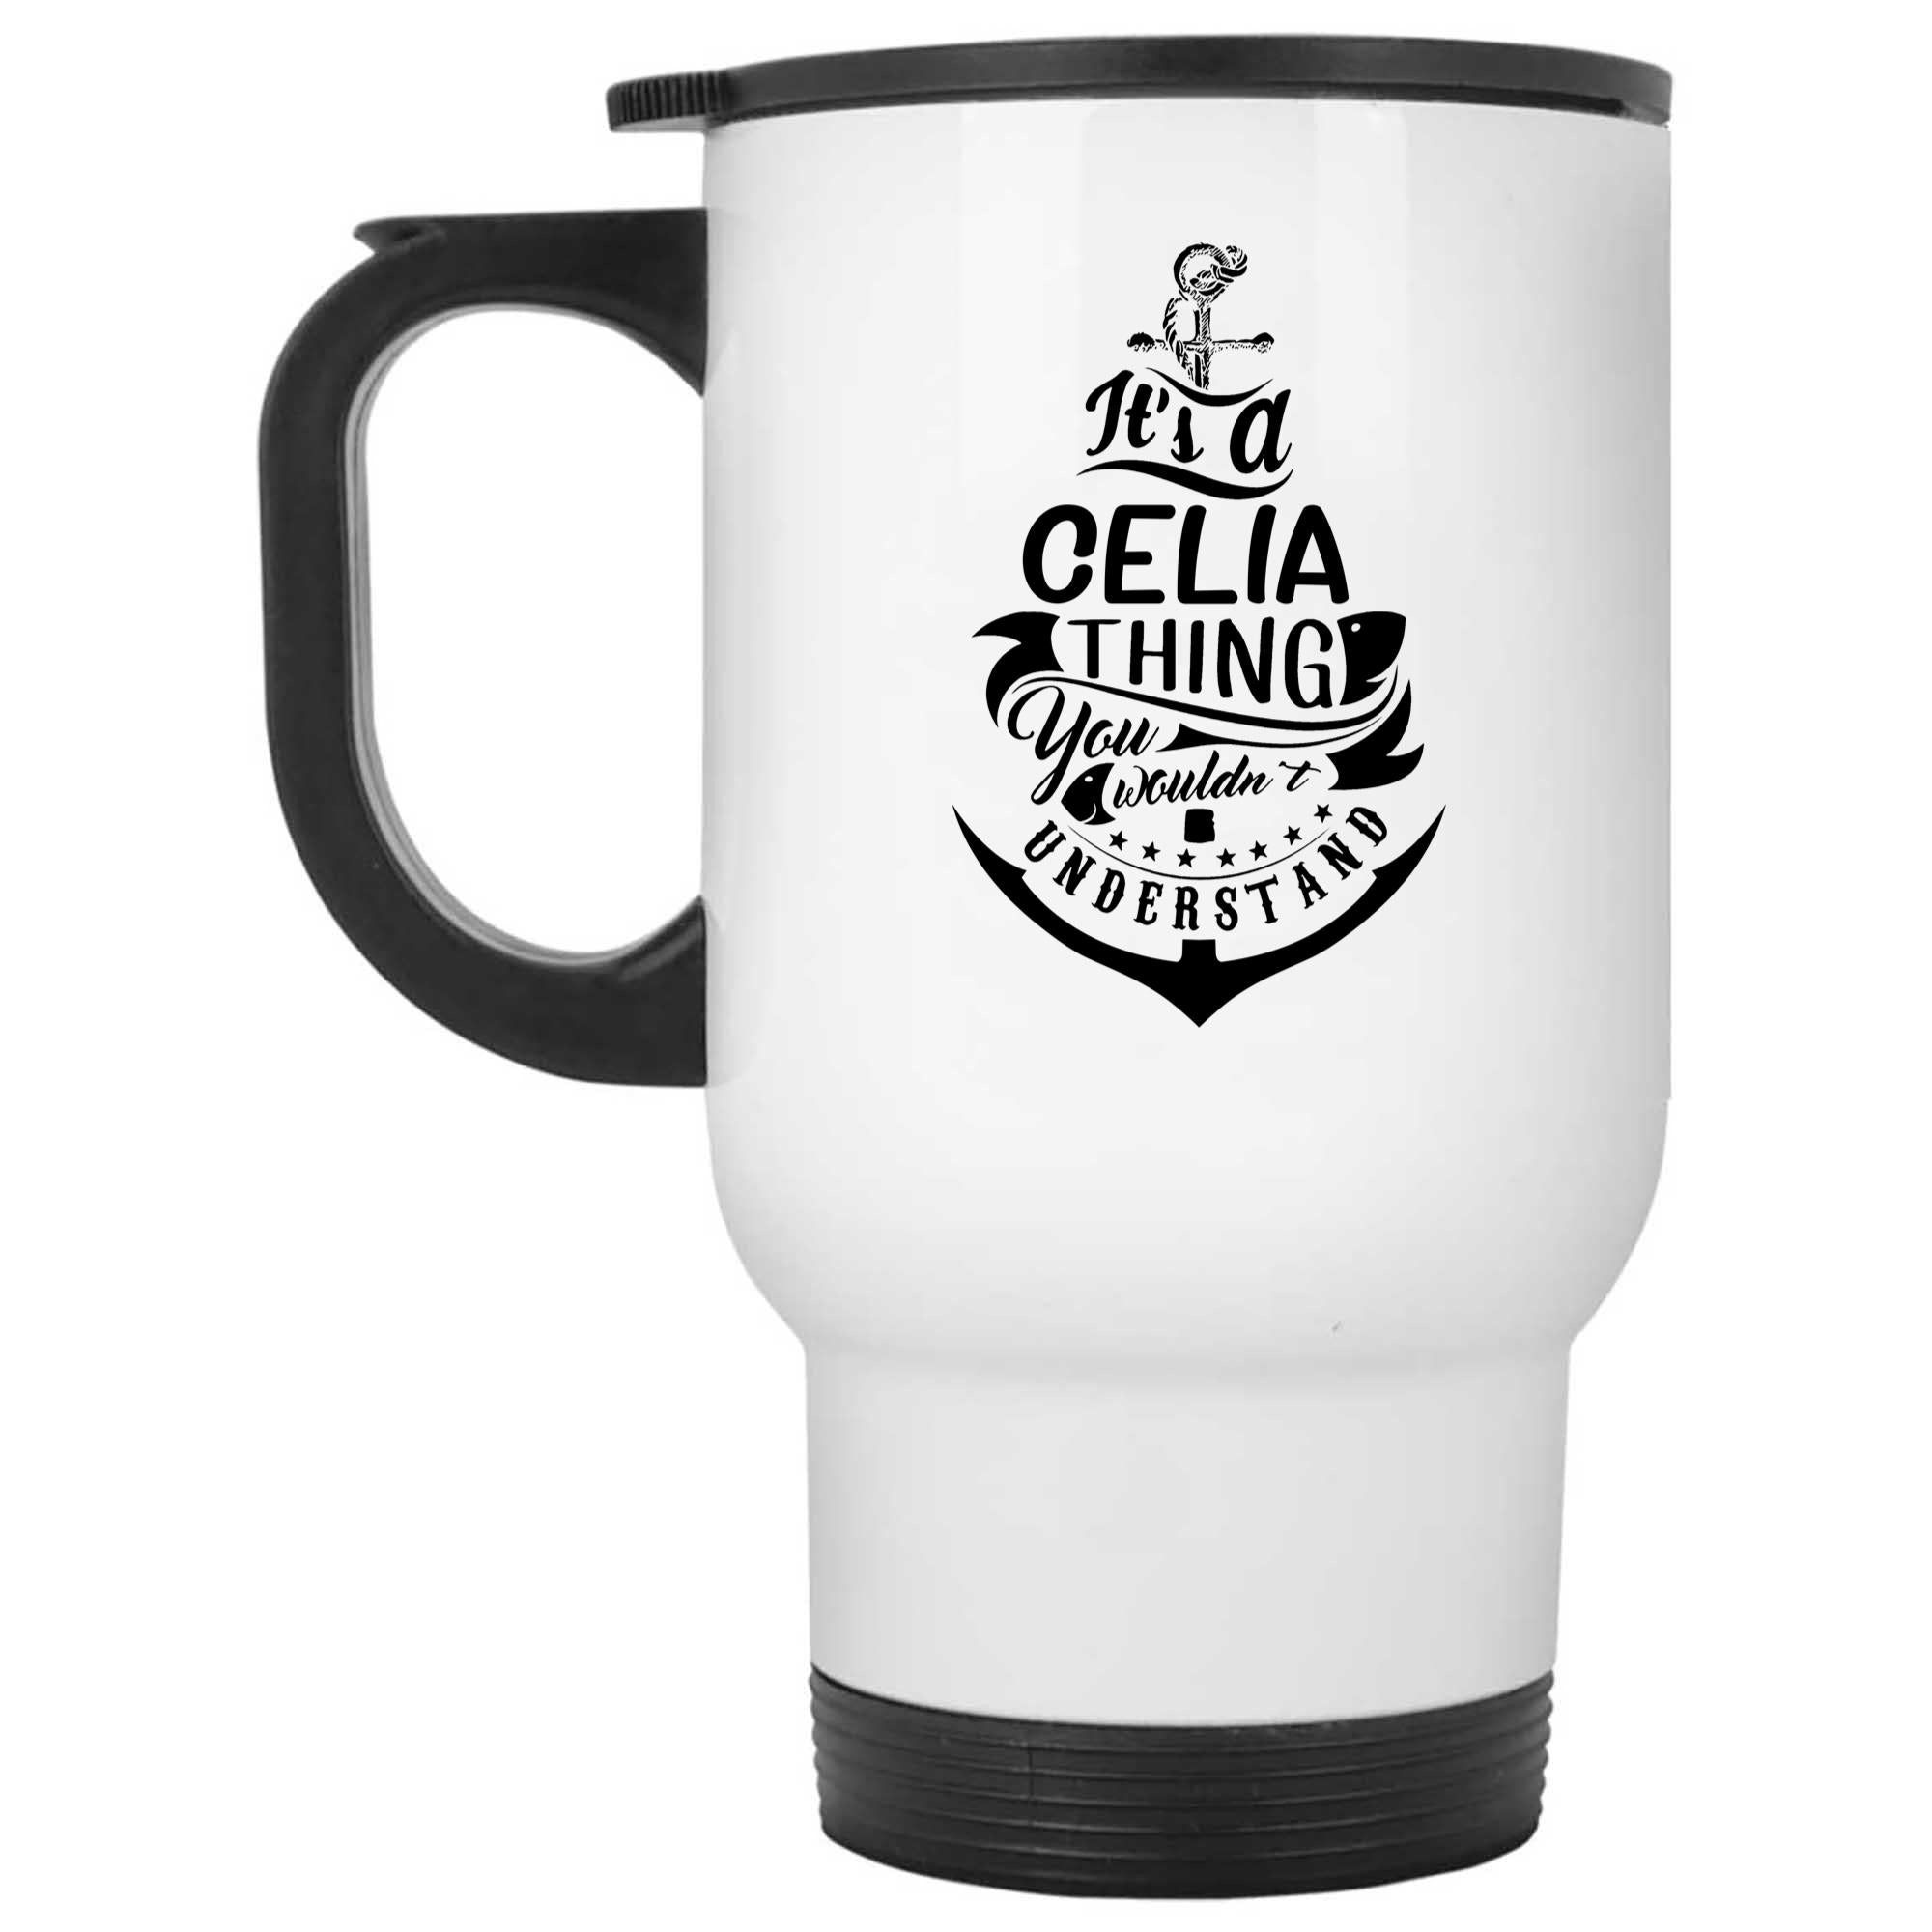 Skitongifts Funny Ceramic Novelty Coffee Mug Best Funny Registry By Name Tags It's Celia Thing You Wouldn't Understand 0VO3IrQ